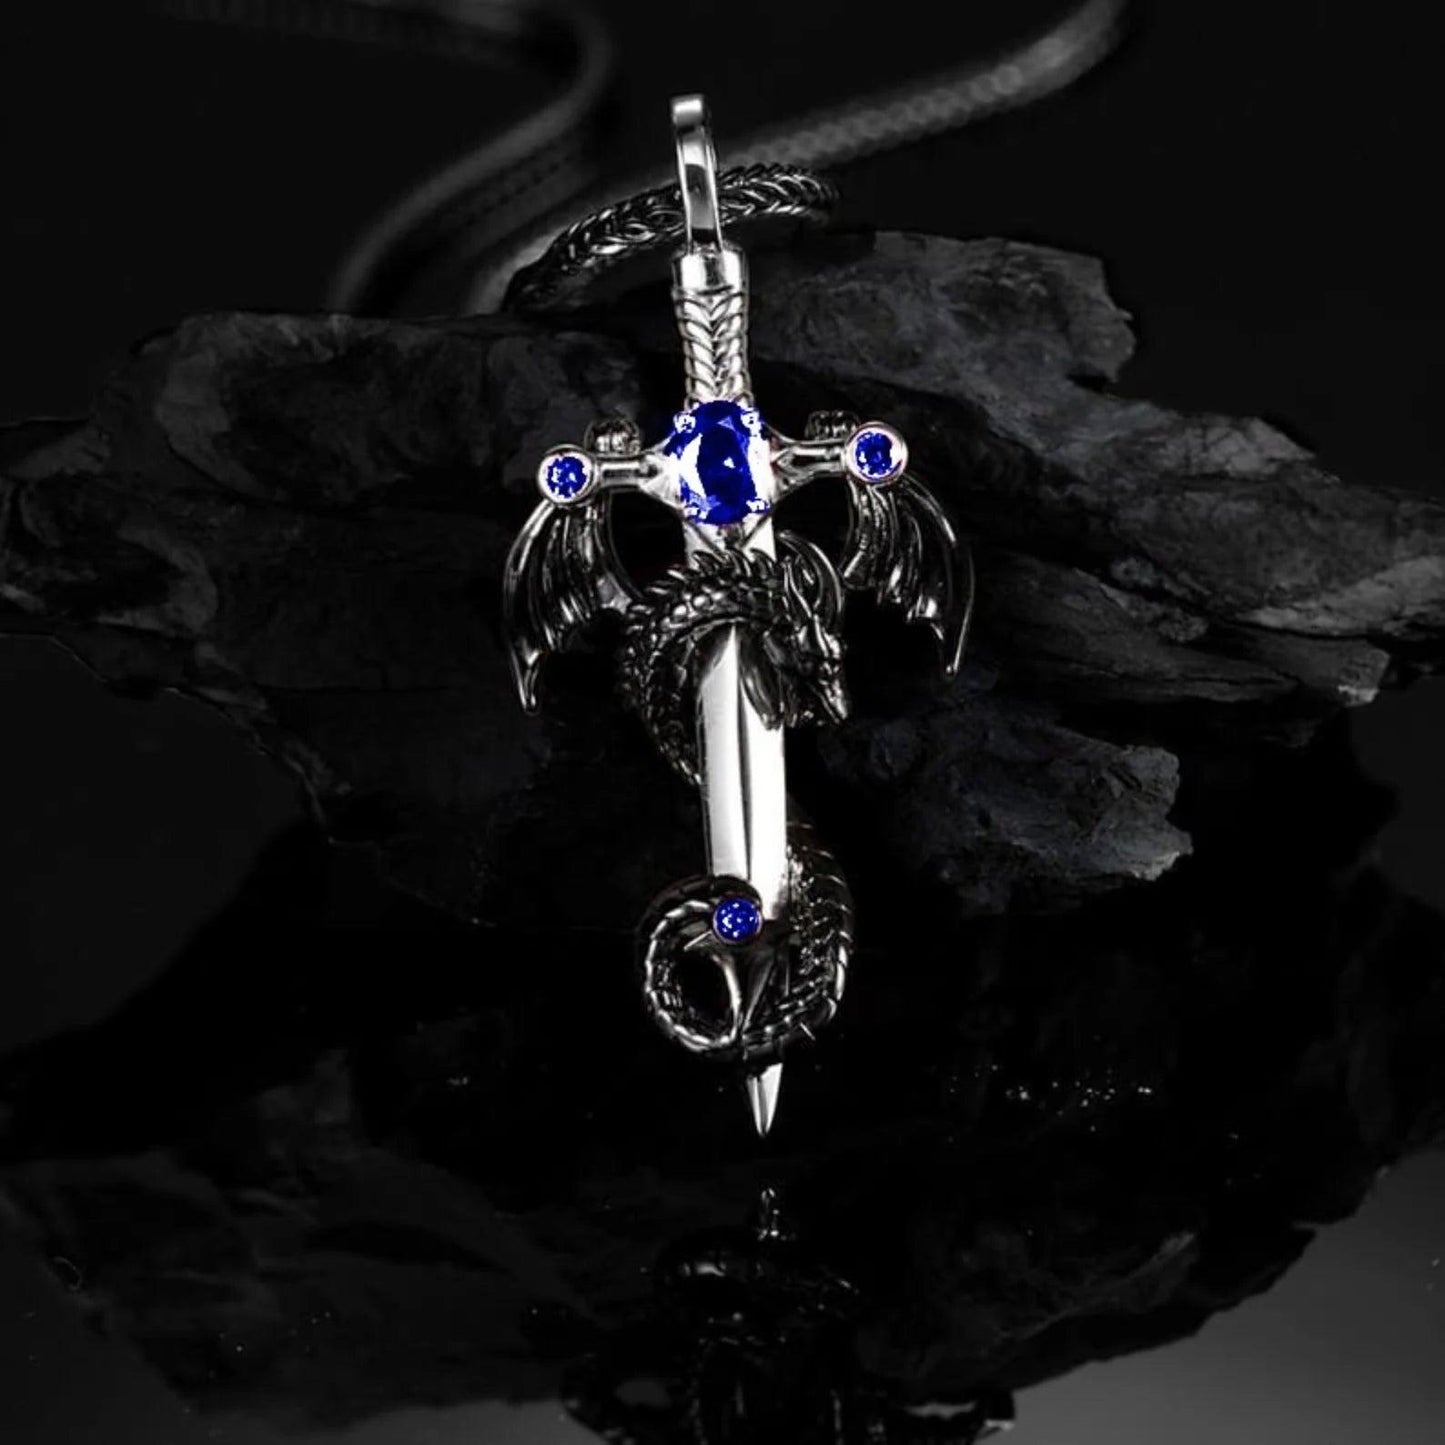 Dragon & Sword Birthstone Necklace - Customizable Gemstone Pendant, Mythical Jewelry for Strength and Style